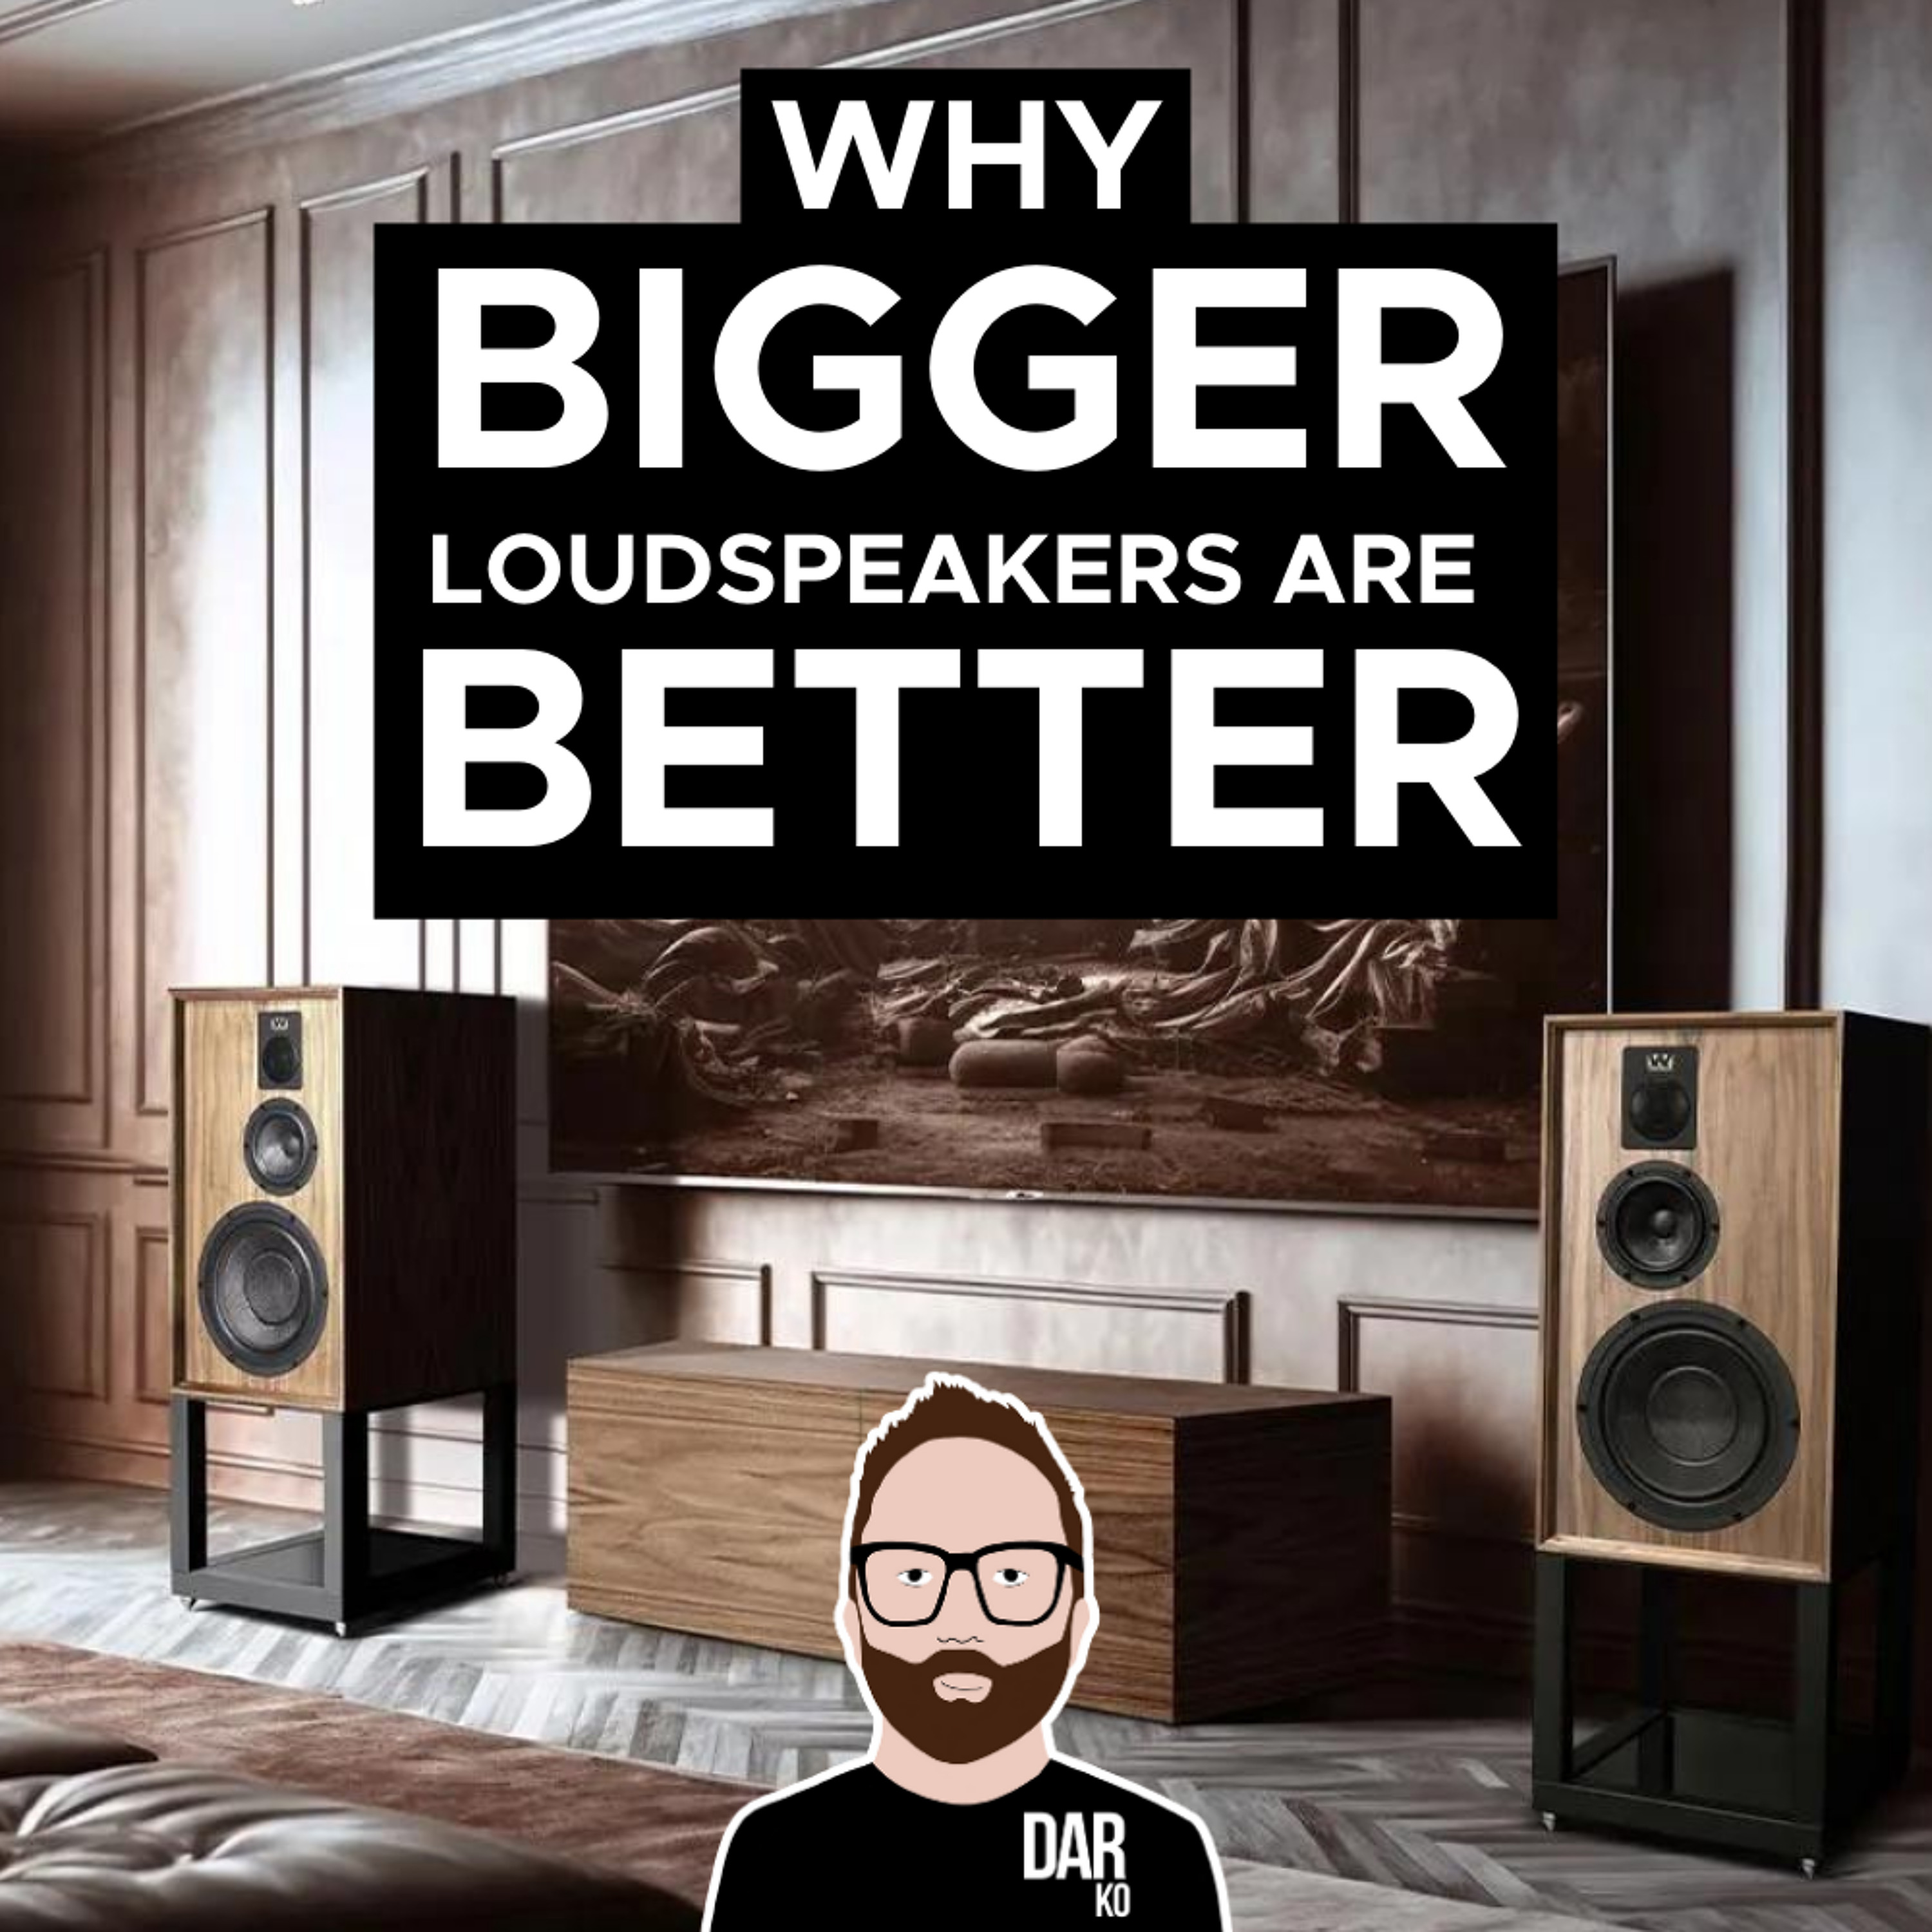 Why BIGGER loudspeakers are BETTER